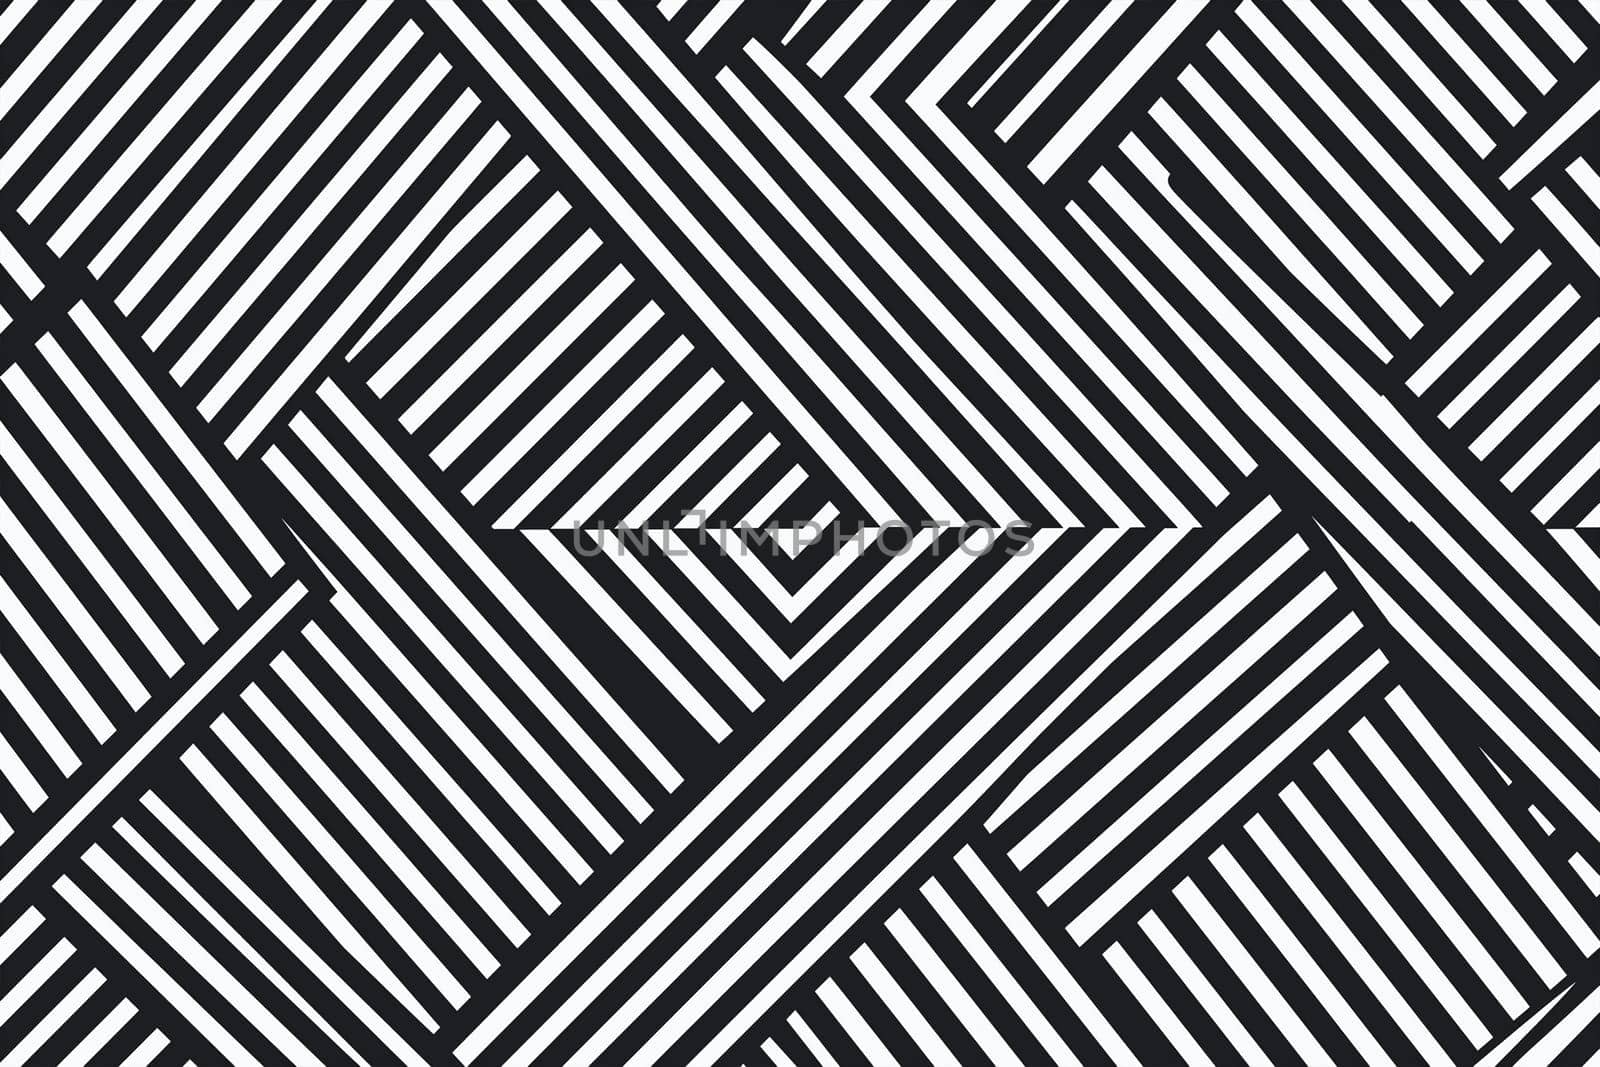 Black and White Geometric Pattern With Lines by Sd28DimoN_1976